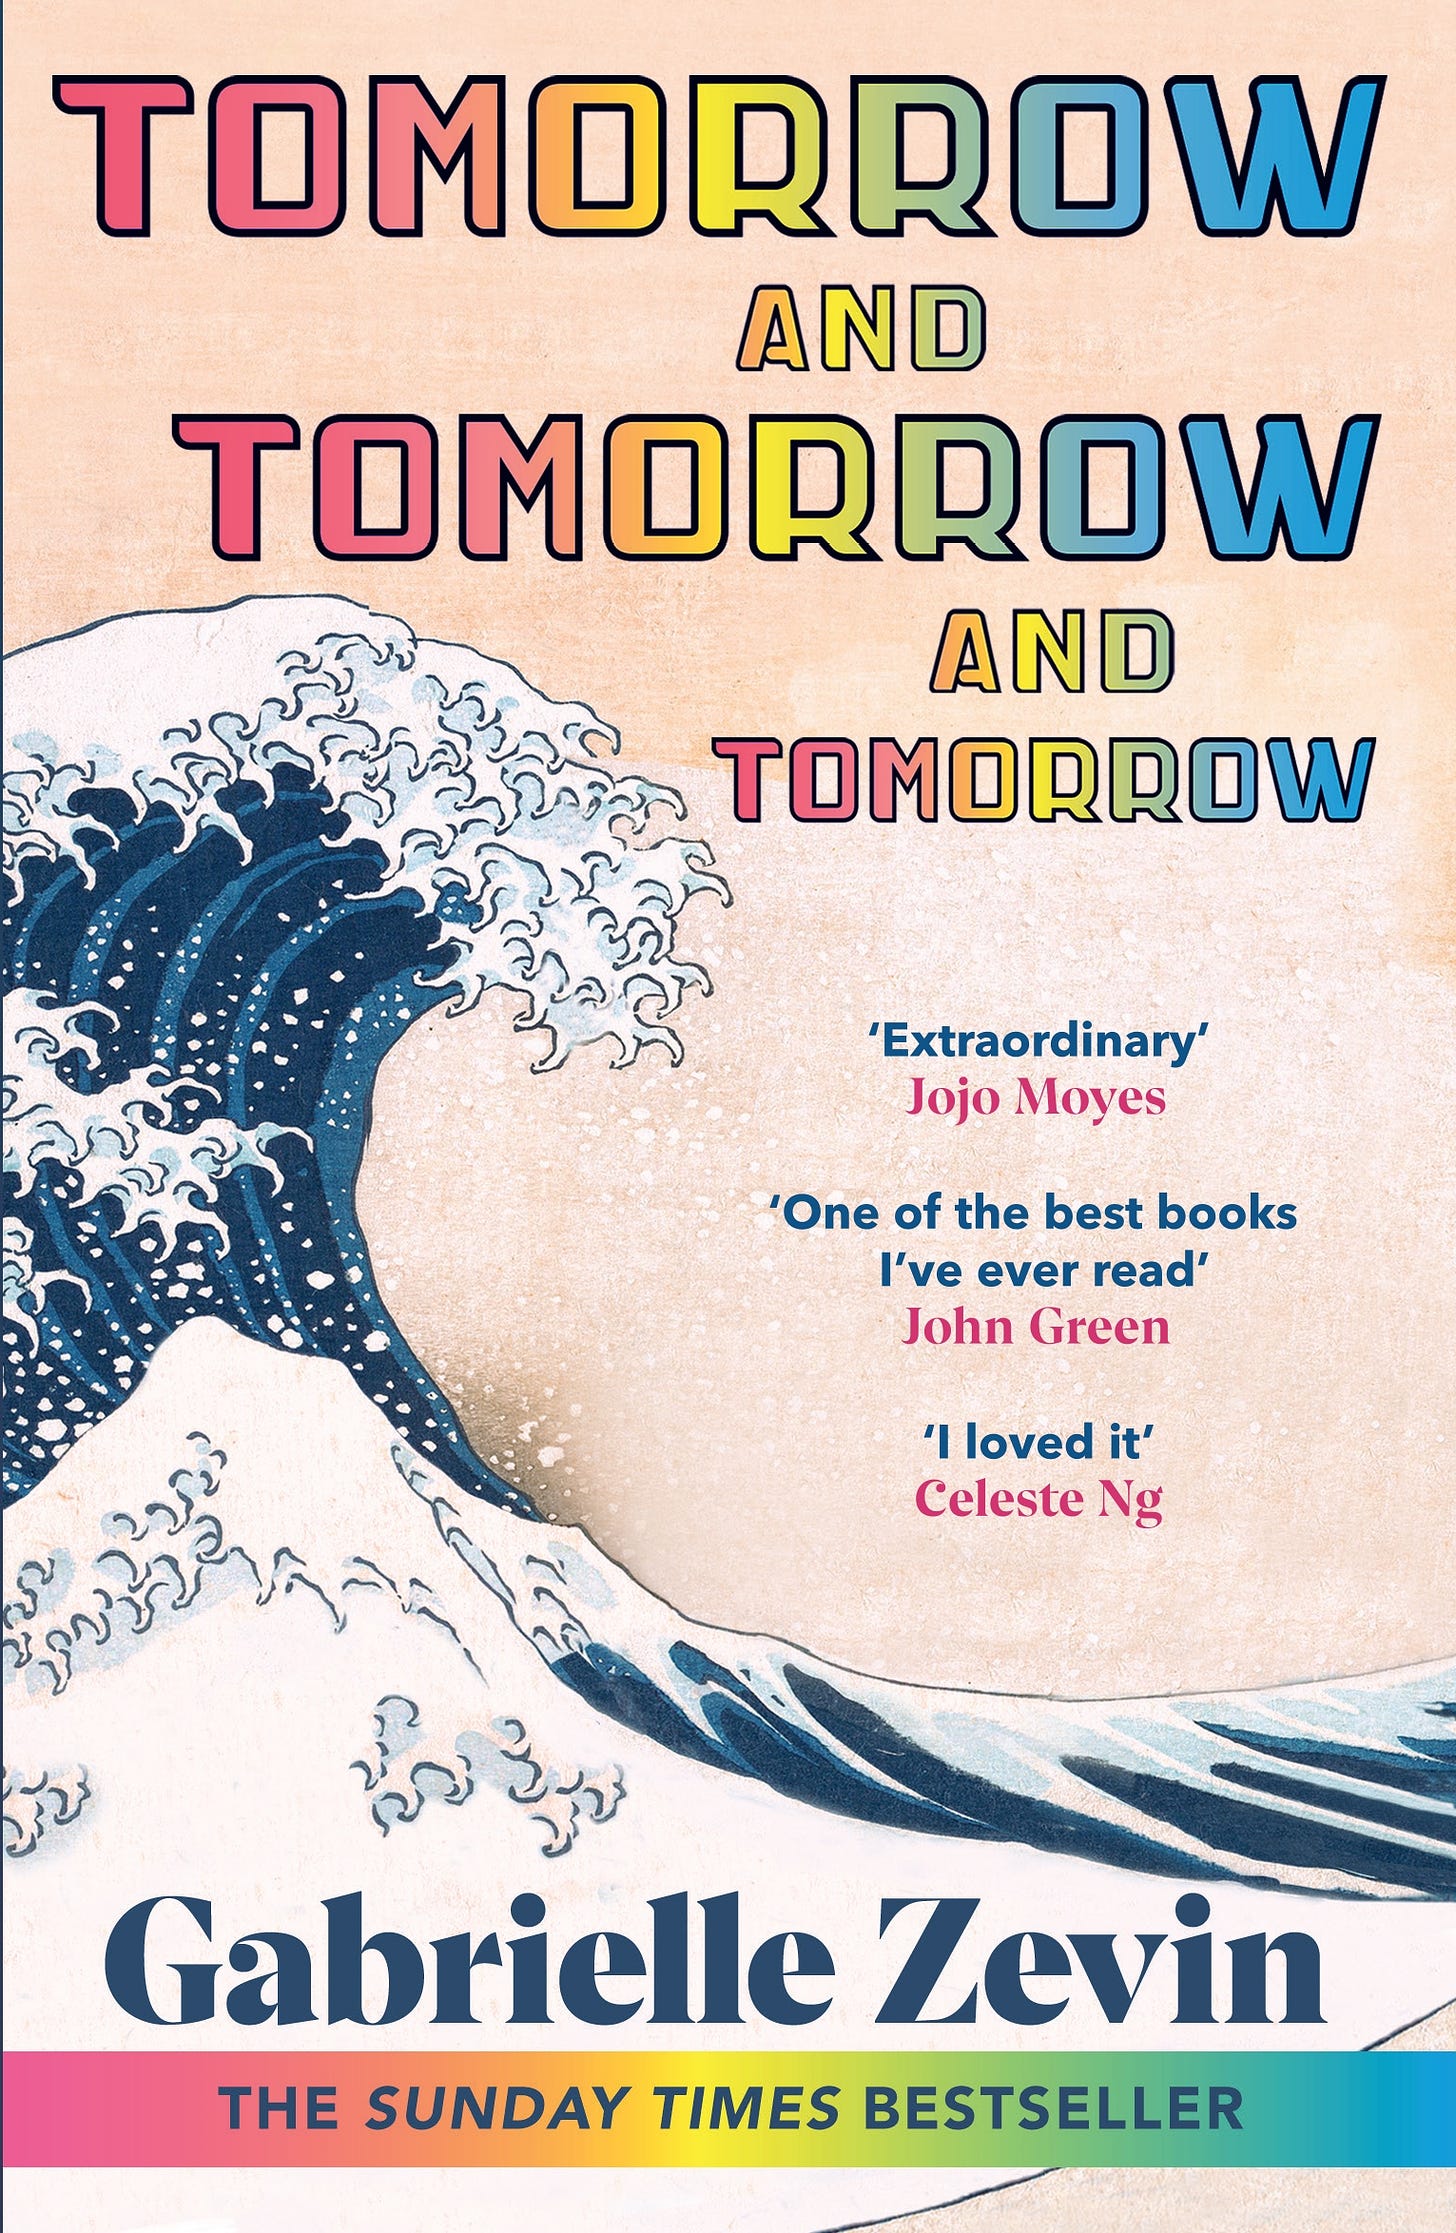 The cover of the book Tomorrow And Tomorrow and Tomorrow by Gabrielle Zevin, featuring an illustration on Hokusai's The Great Wave off Kanagawa